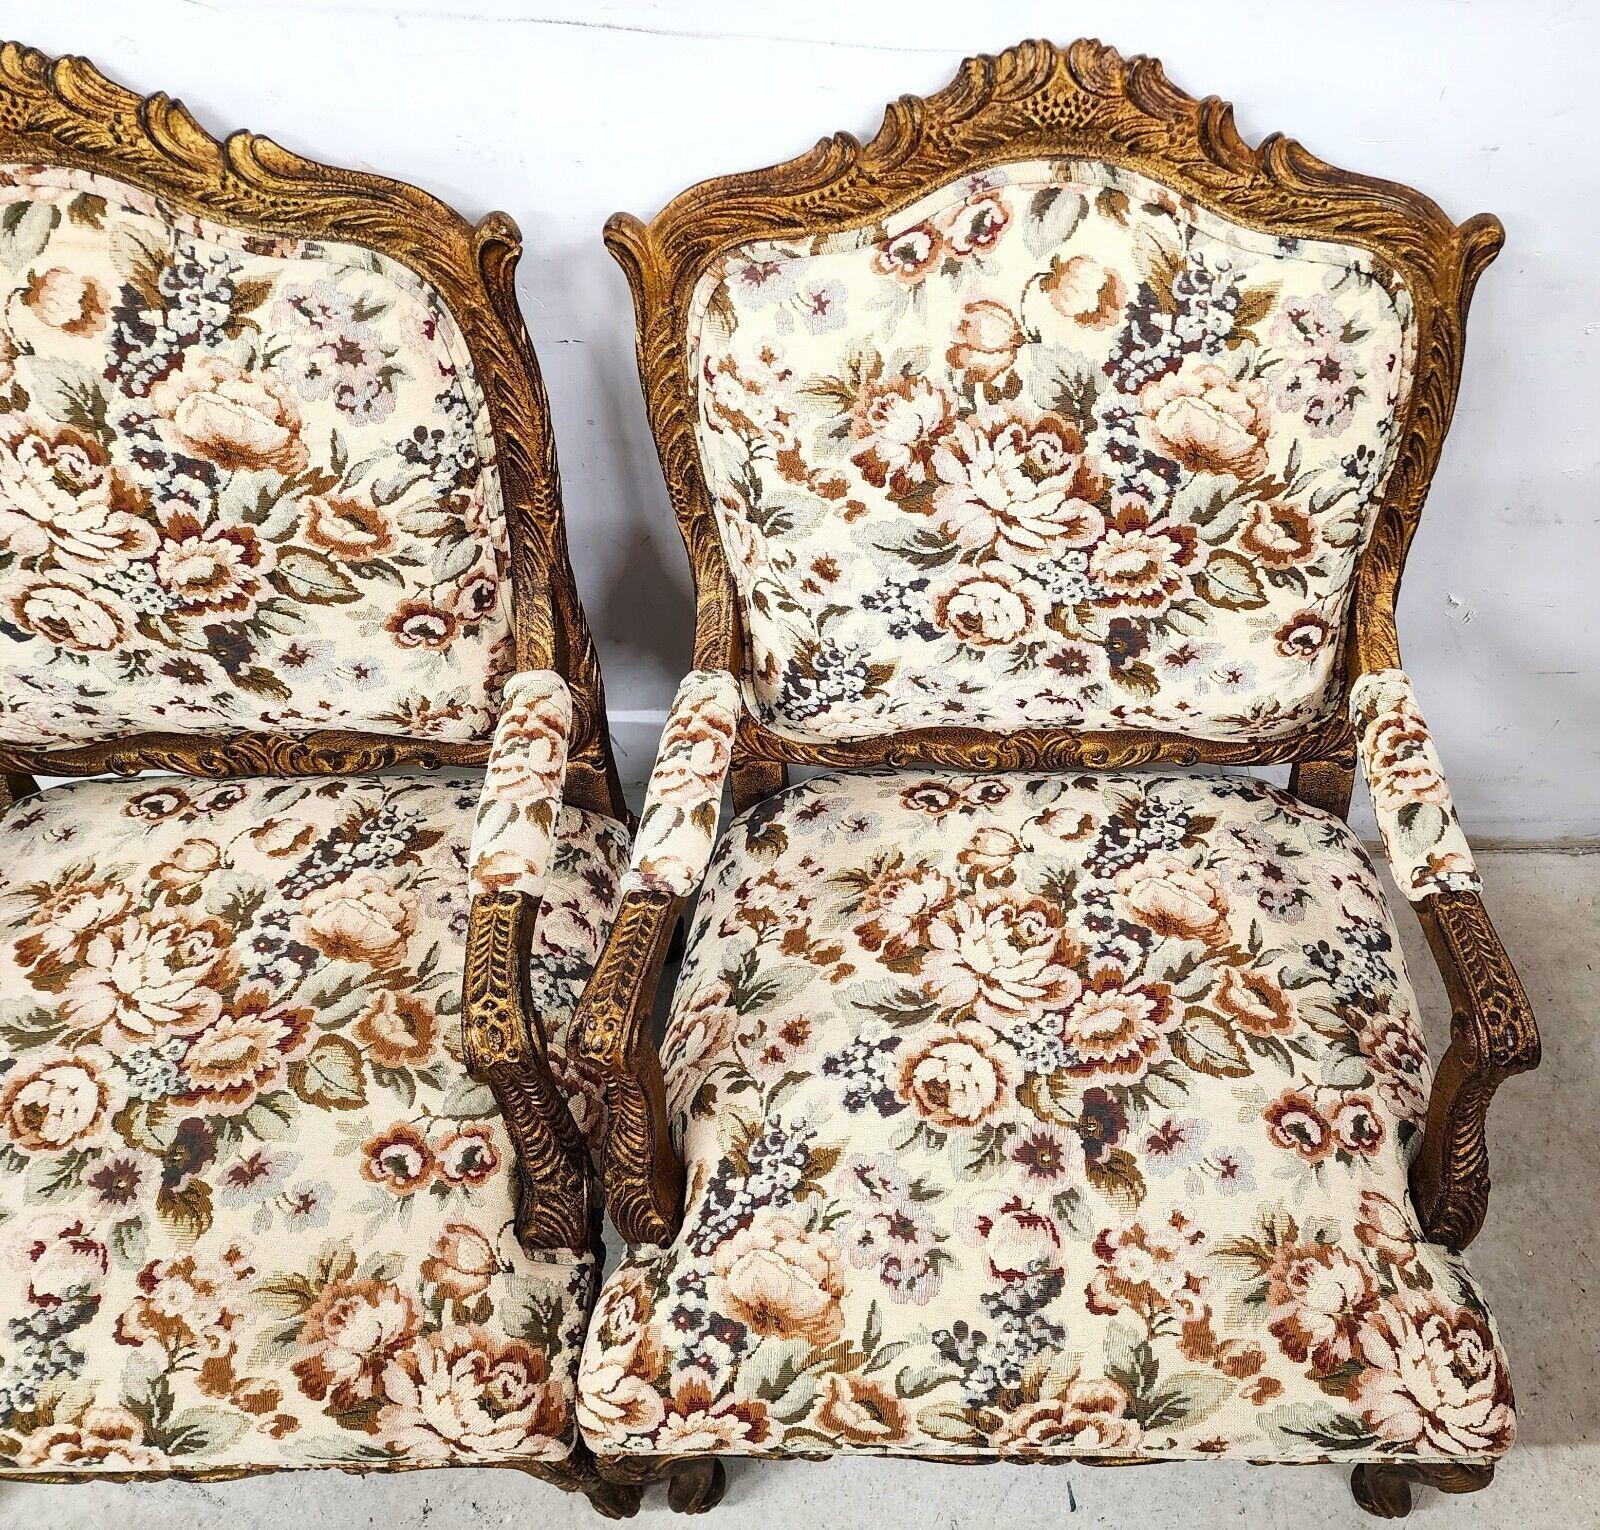 French Louis XV Rococo Giltwood Fauteuil Oversized Armchairs - a Pair In Good Condition For Sale In Lake Worth, FL